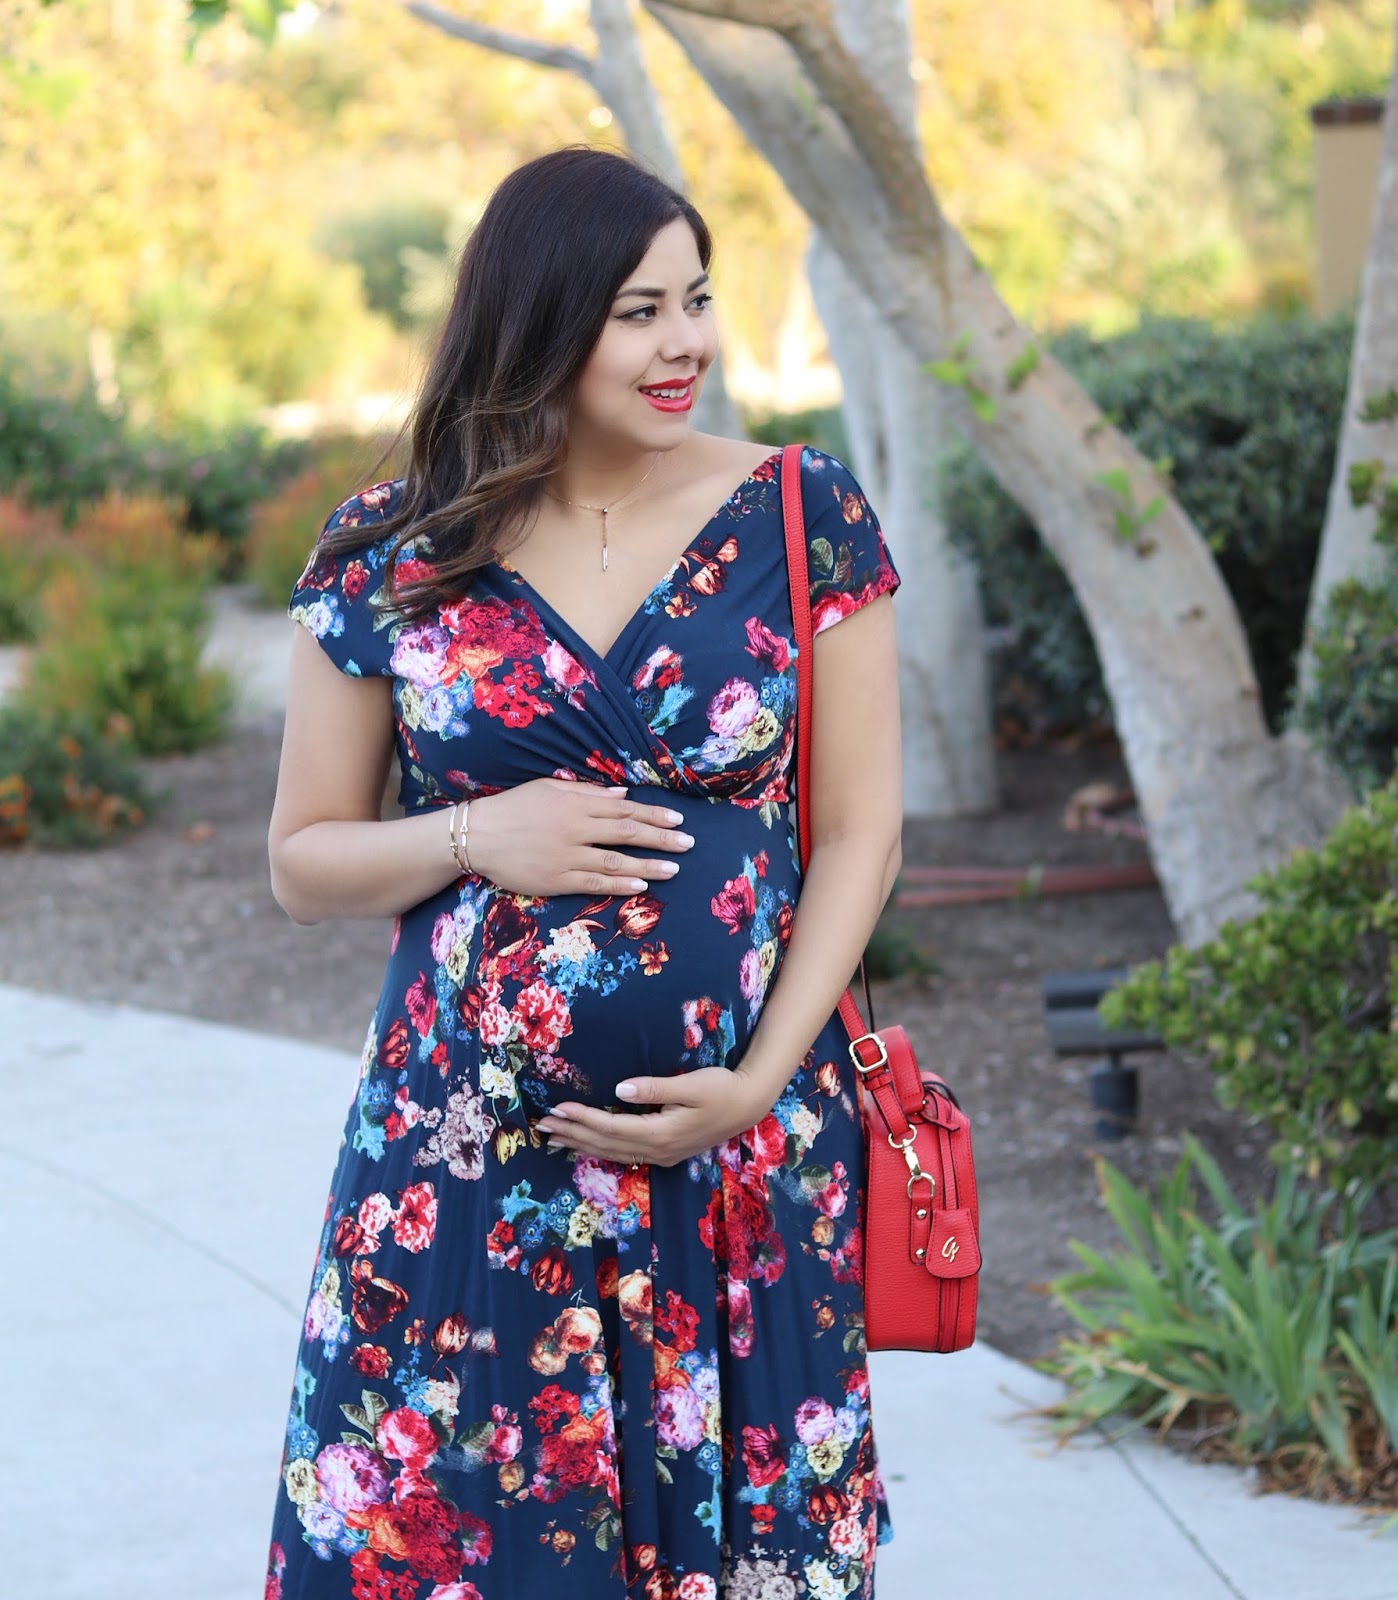 Elegant Maternity Outfit - Lil bits of Chic